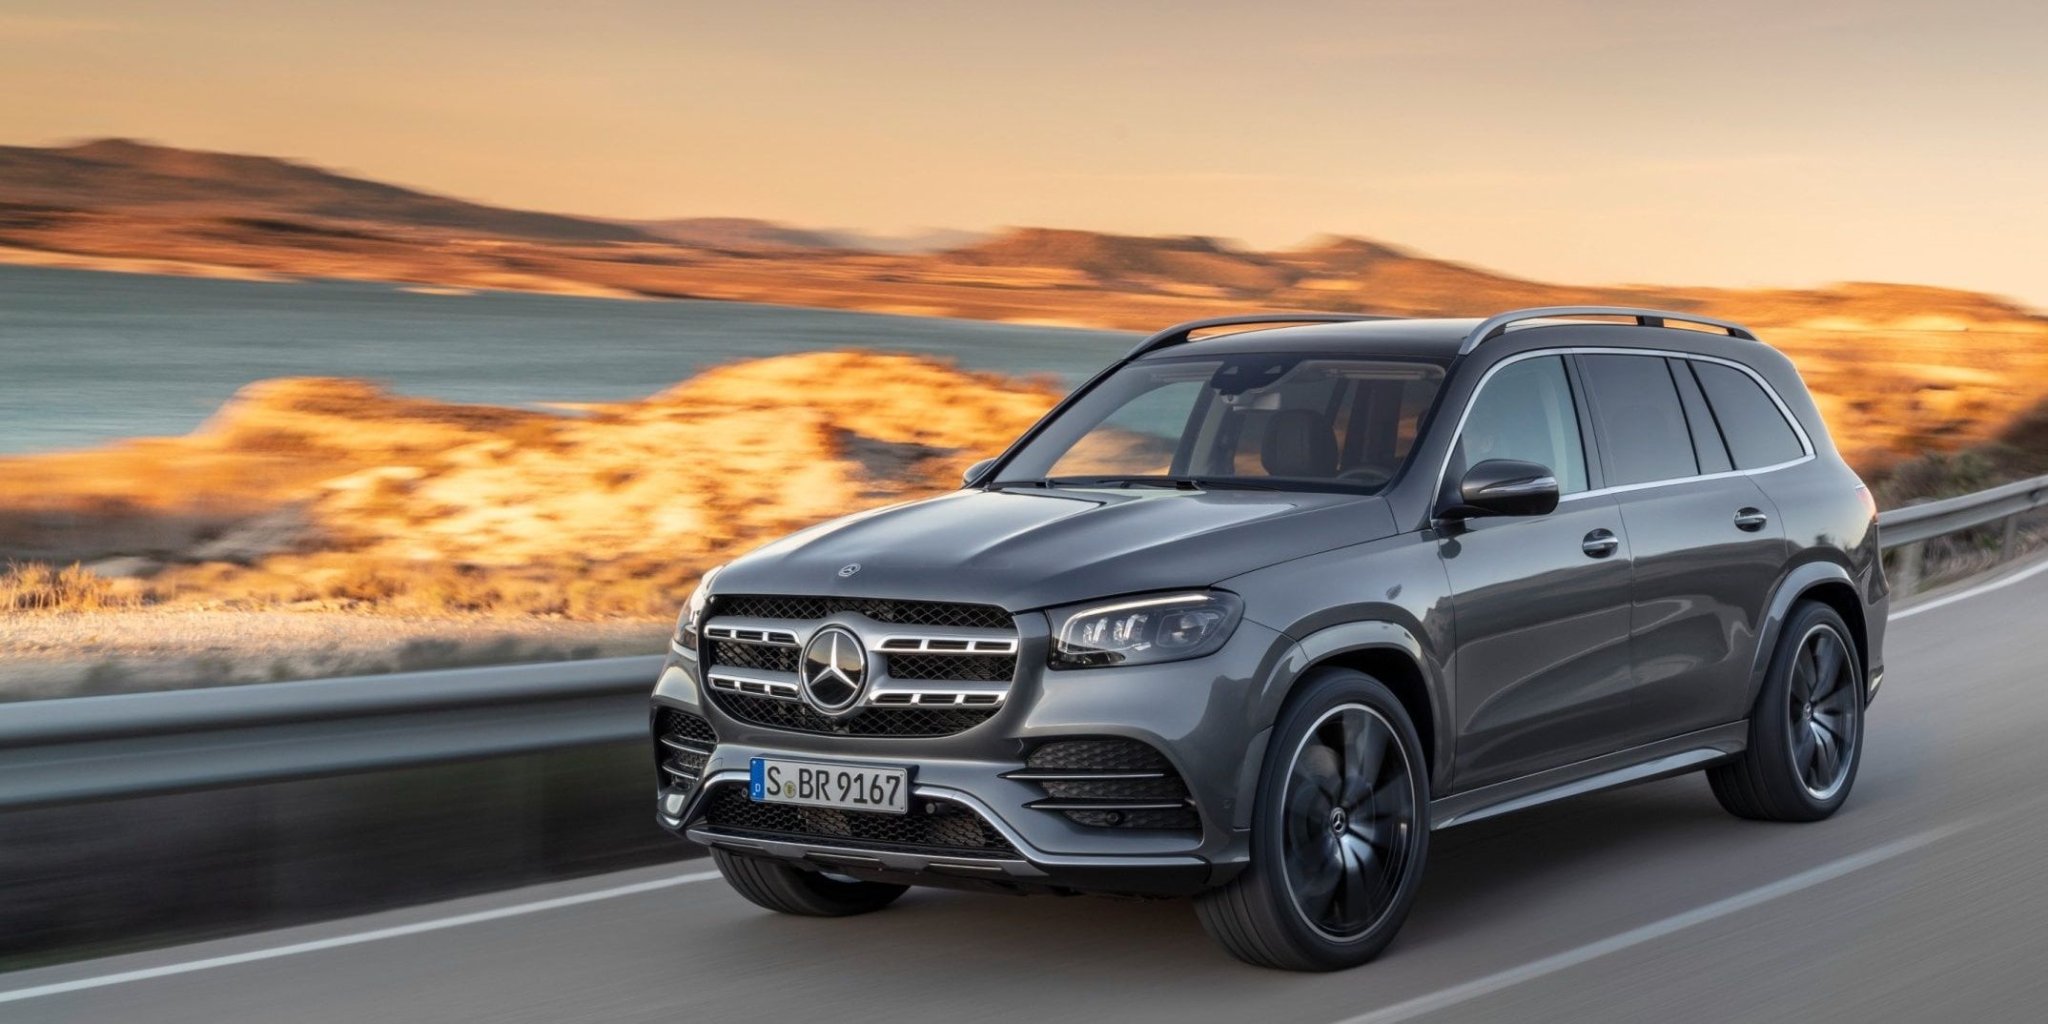 5 Best European Luxury SUVs (And 5 American We'd Rather Have)